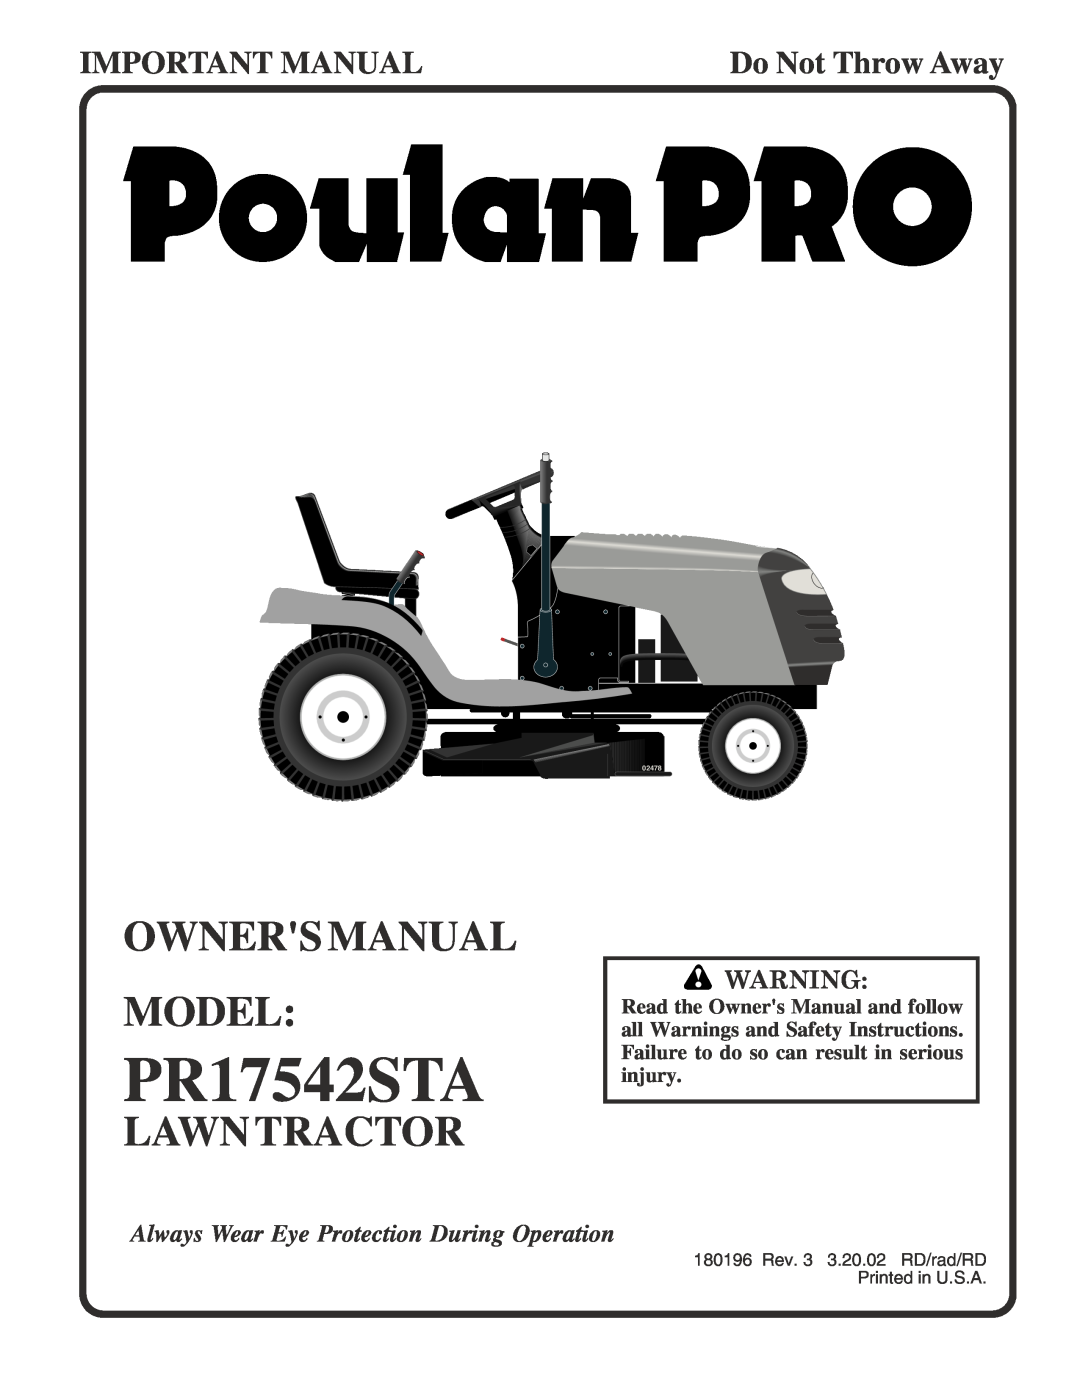 Poulan PR17542STA owner manual Owners Manual Model, Lawntractor, Important Manual, Do Not Throw Away, 02478 